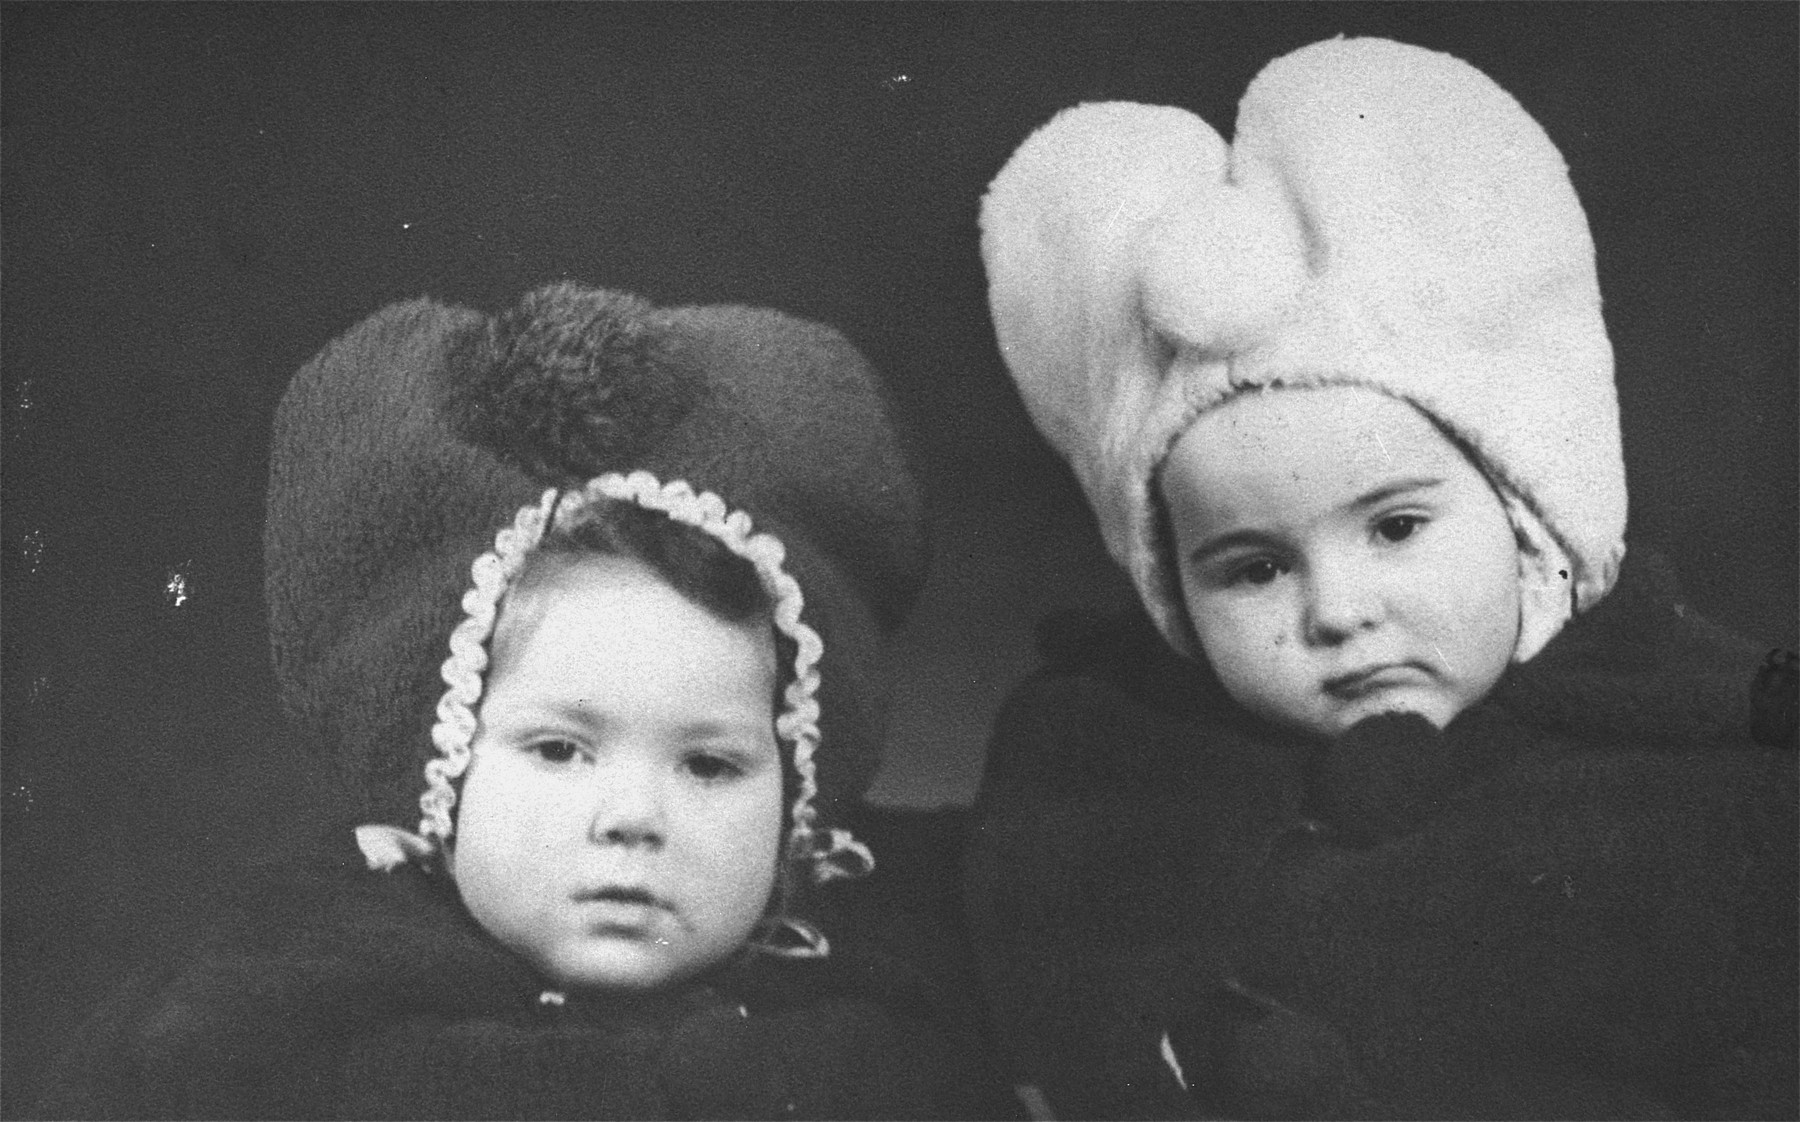 Portrait of a Jewish child in hiding with her Lithuanian "sister".

Pictured are Henia Wisgardisky (left) and Nijole Stankevic (right), the daughter of her rescuers, Jonas and Joana Stankiewicz.